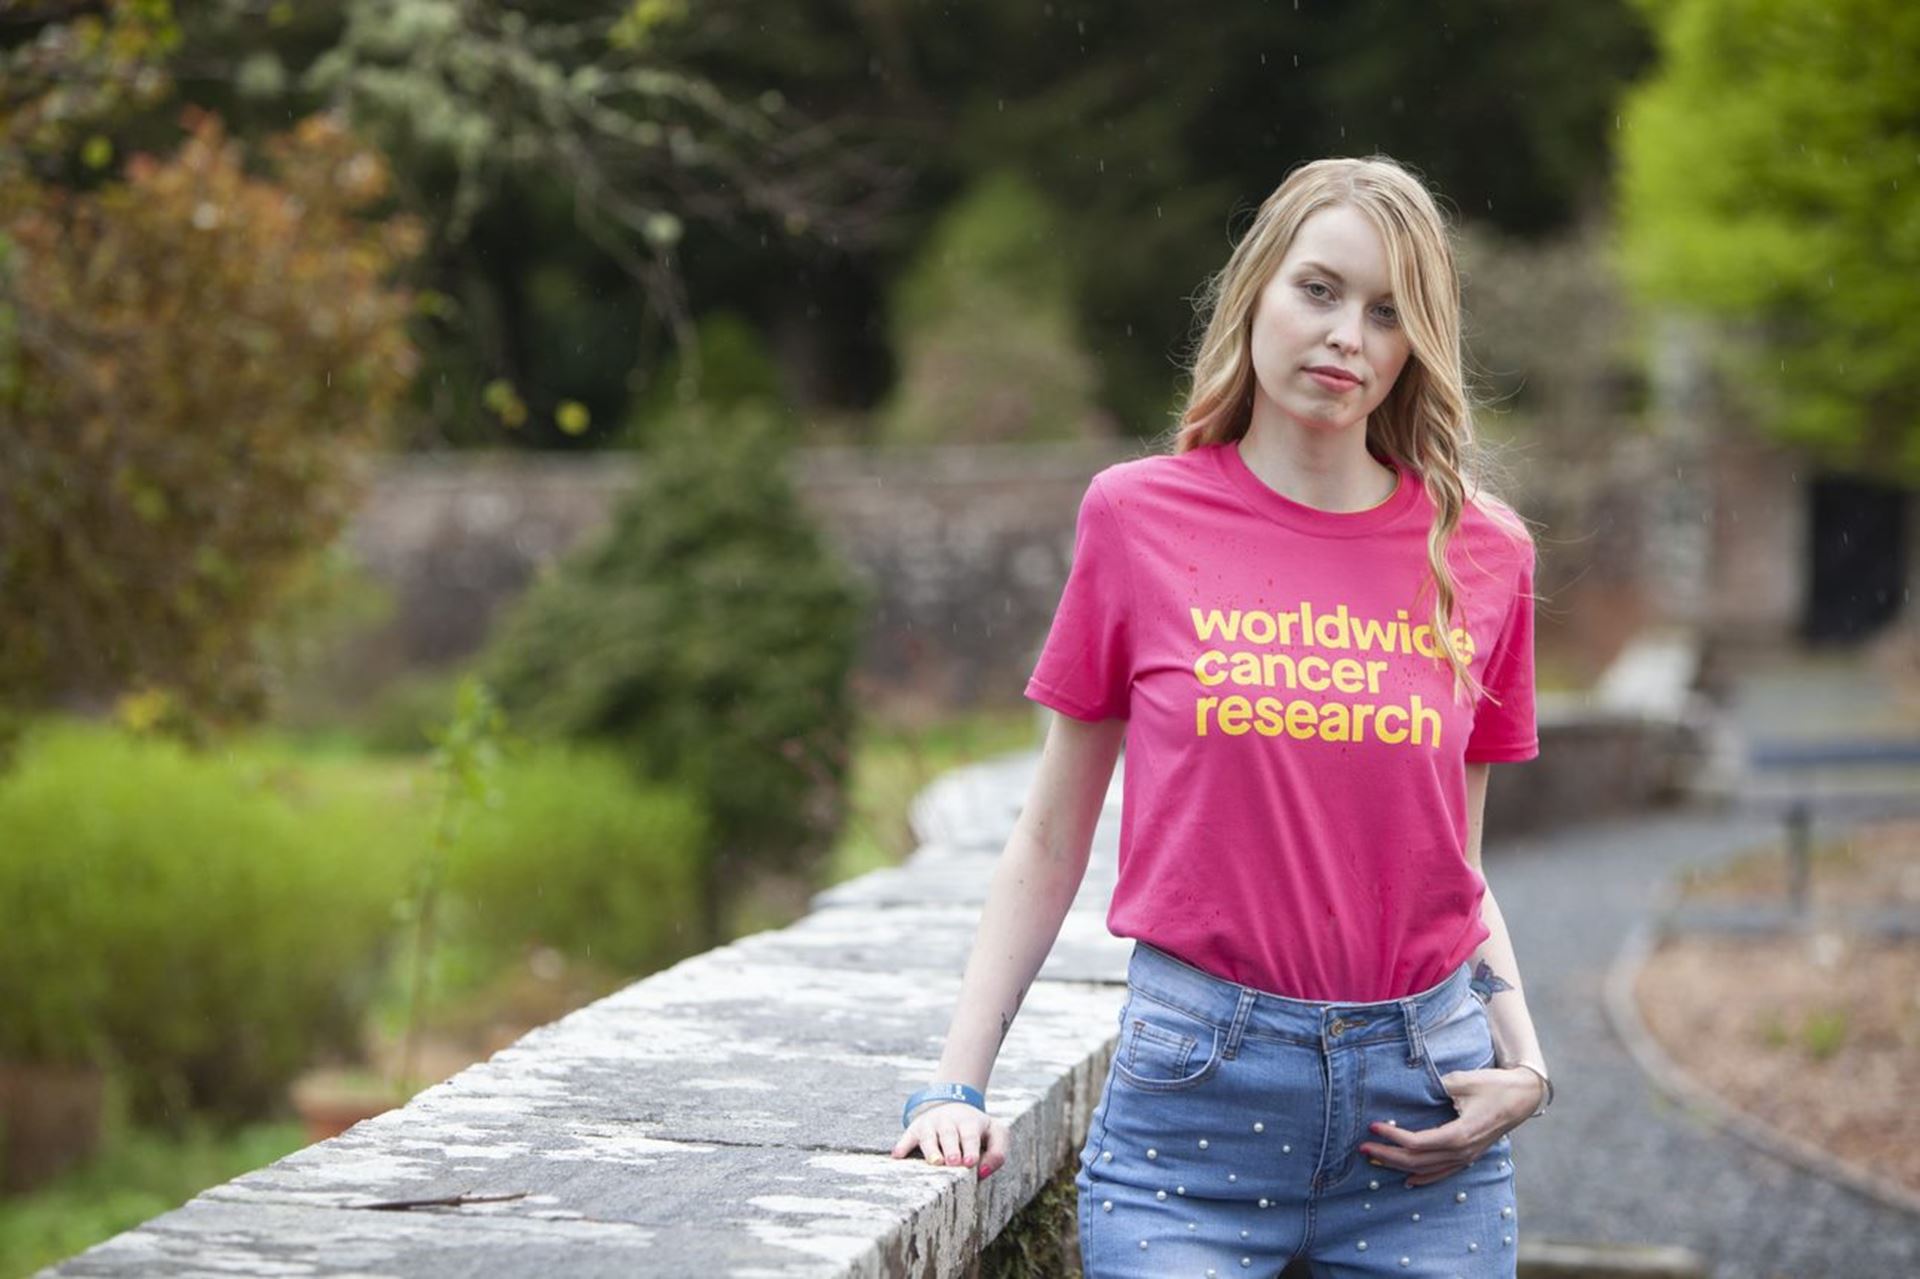 Eilidh standing outside wearing a Worldwide Cancer Research tshirt